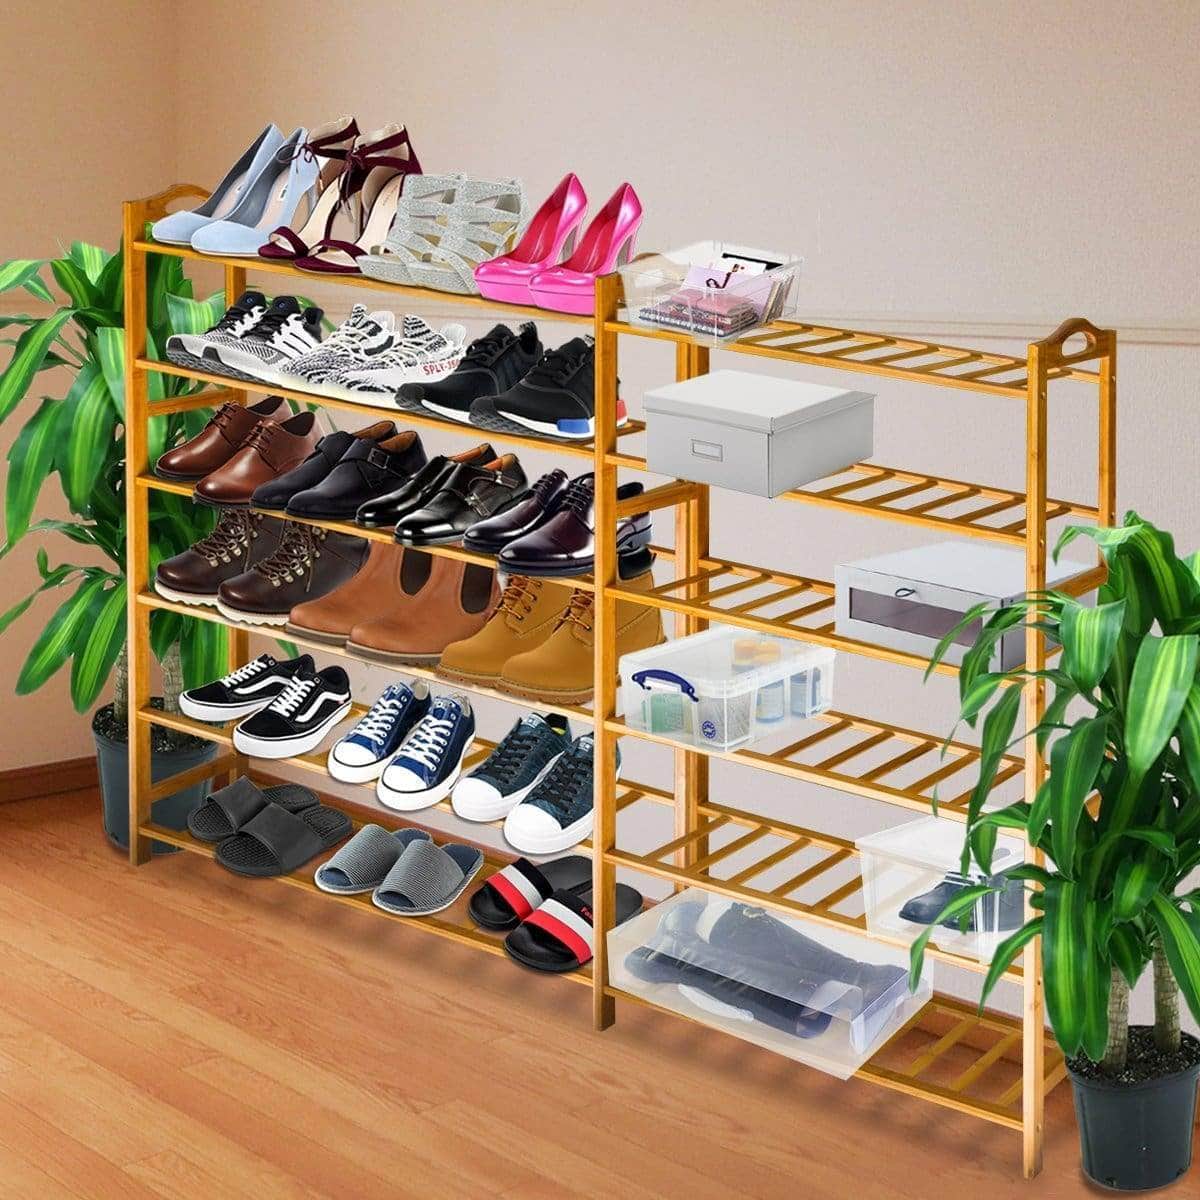 Storage anko bamboo shoe rack natural bamboo thickened 6 tier mesh utility entryway shoe shelf storage organizer suitable for entryway closet living room bedroom 1 pack